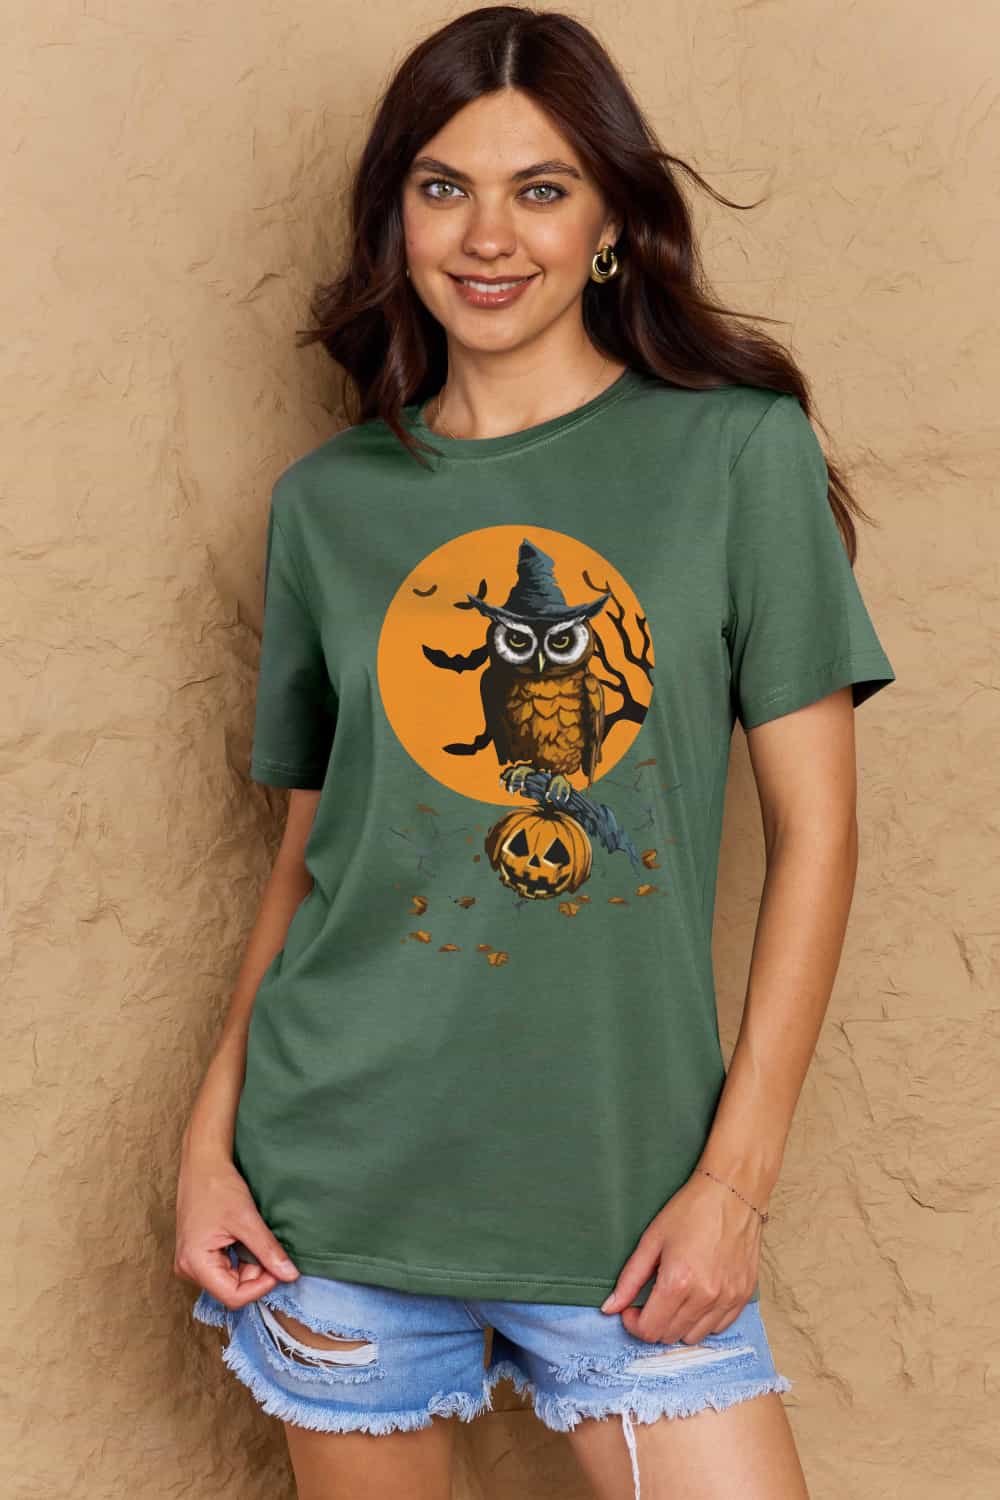 Simply Love Halloween Theme Graphic Cotton Tee - Online Only